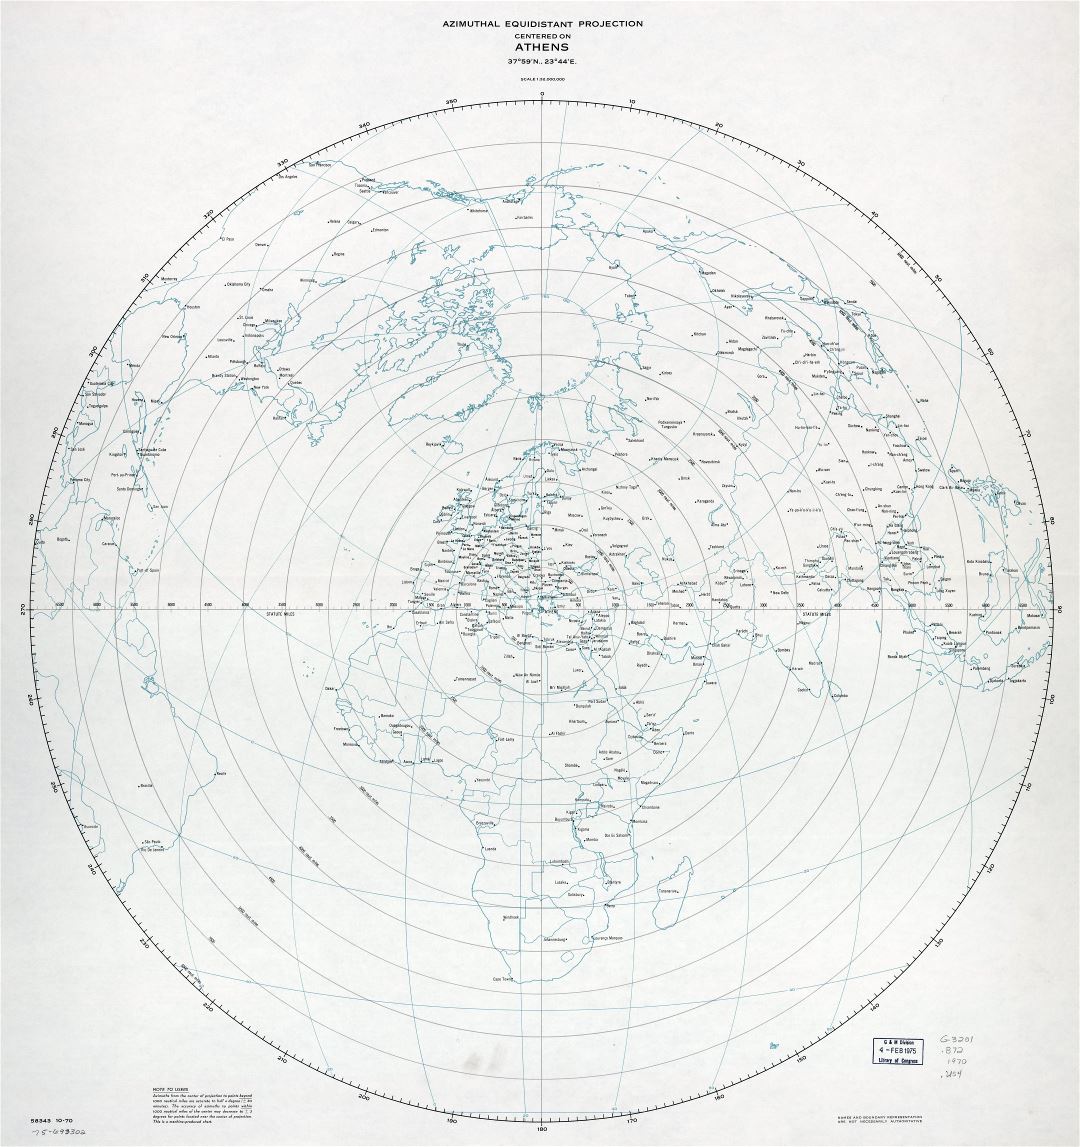 Large scale detail azimuthal equidistant projection map centered on Athens - 1970